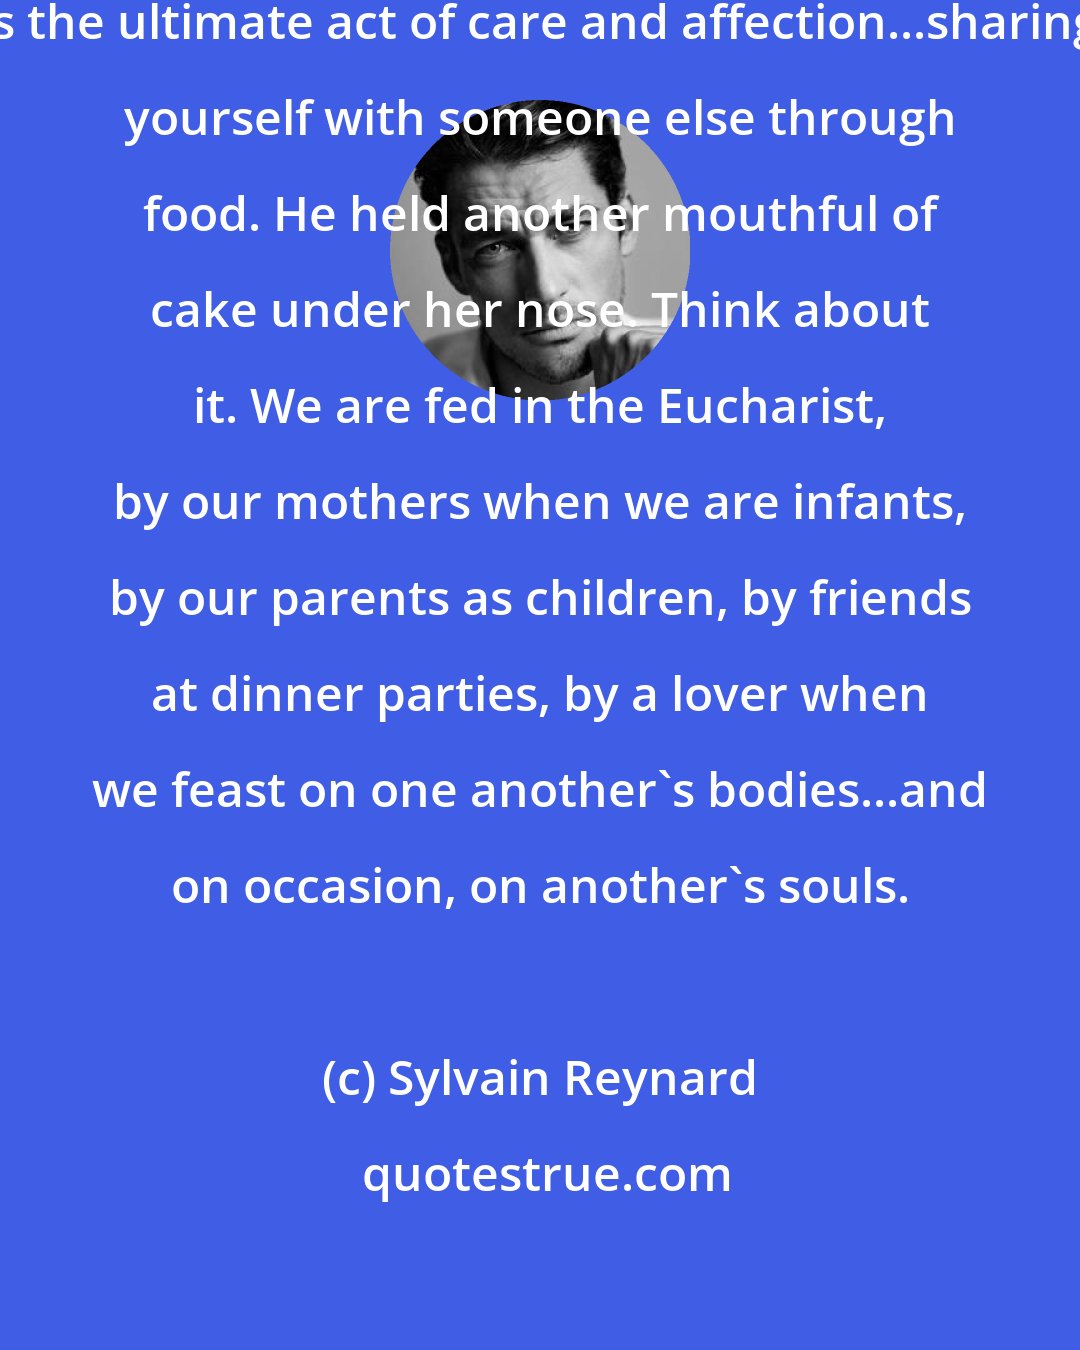 Sylvain Reynard: You know, the act of feeding someone is the ultimate act of care and affection...sharing yourself with someone else through food. He held another mouthful of cake under her nose. Think about it. We are fed in the Eucharist, by our mothers when we are infants, by our parents as children, by friends at dinner parties, by a lover when we feast on one another's bodies...and on occasion, on another's souls.